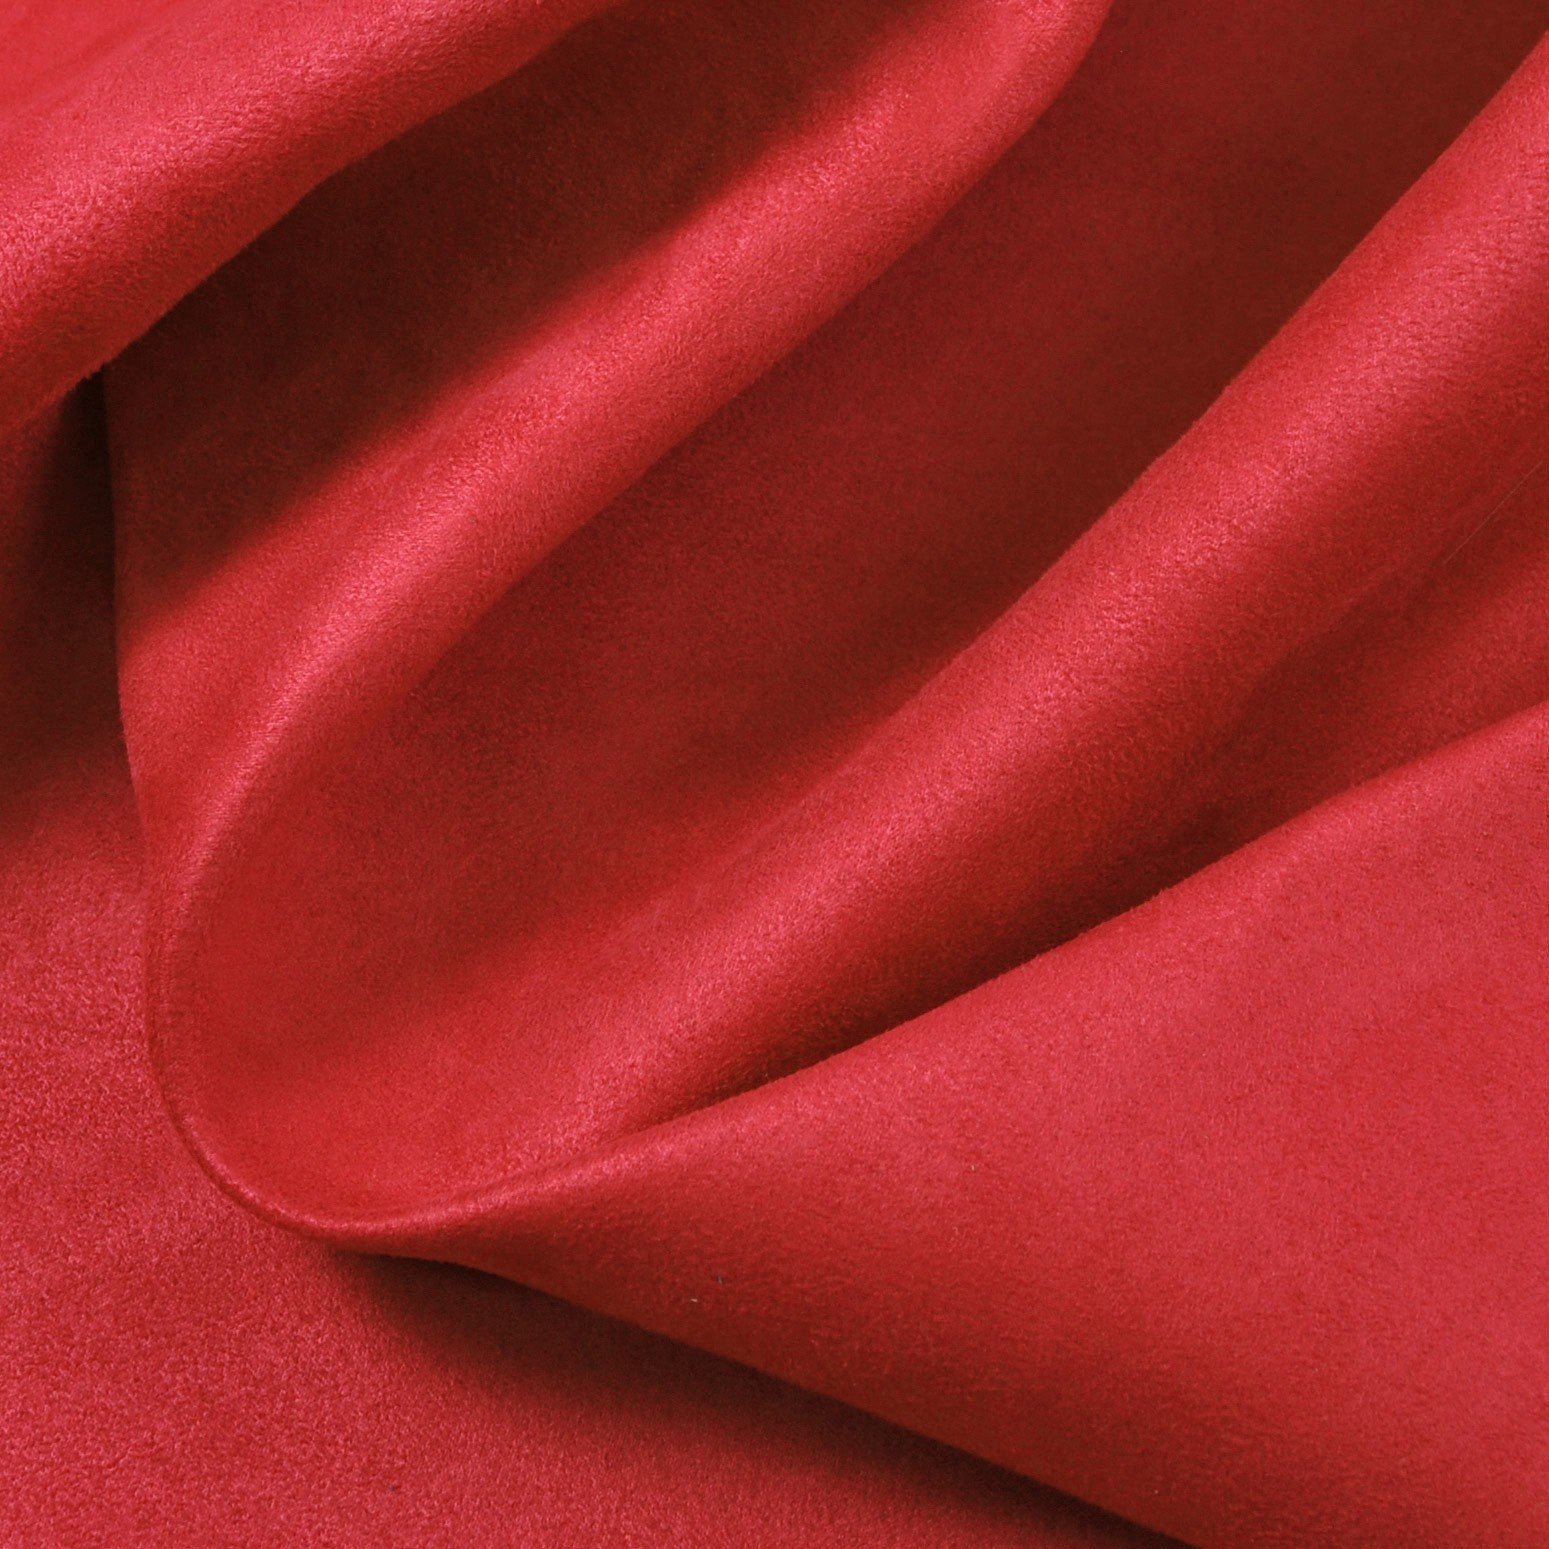 Cherry Red Tulle Fabric by the Yard, Red Tulle Fabric With Cherry